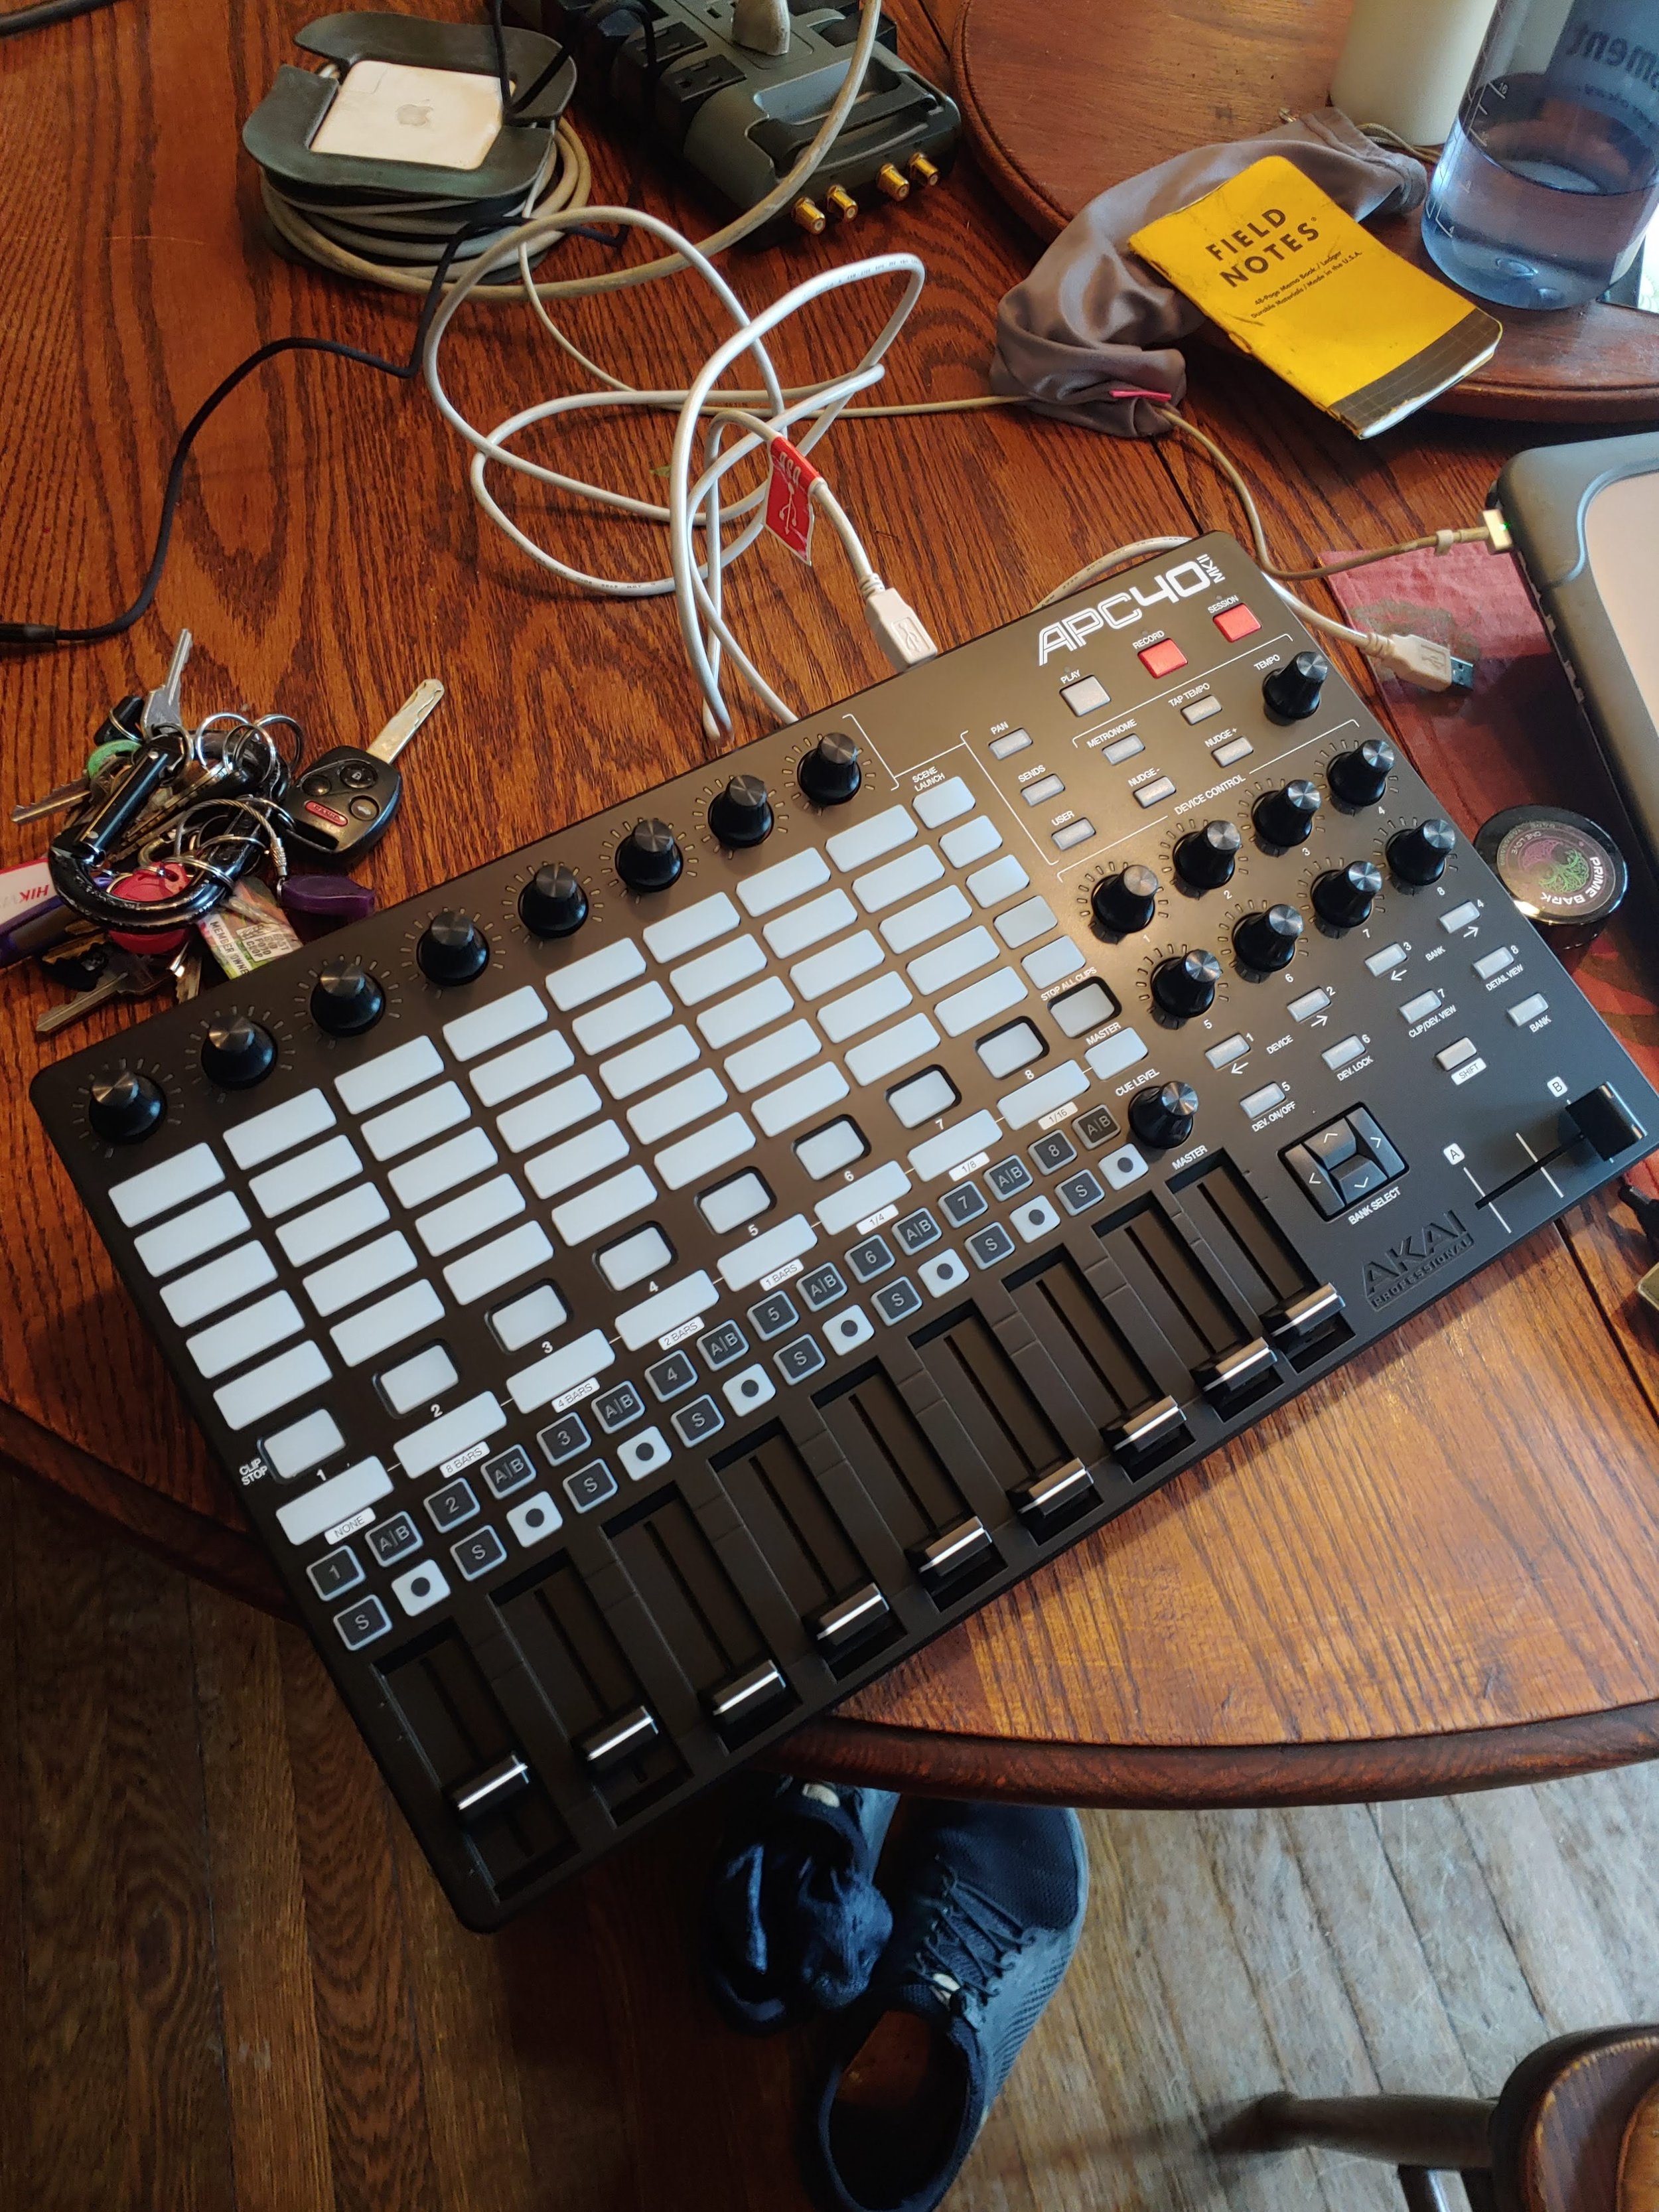 Best MIDI Controllers For VJs? 